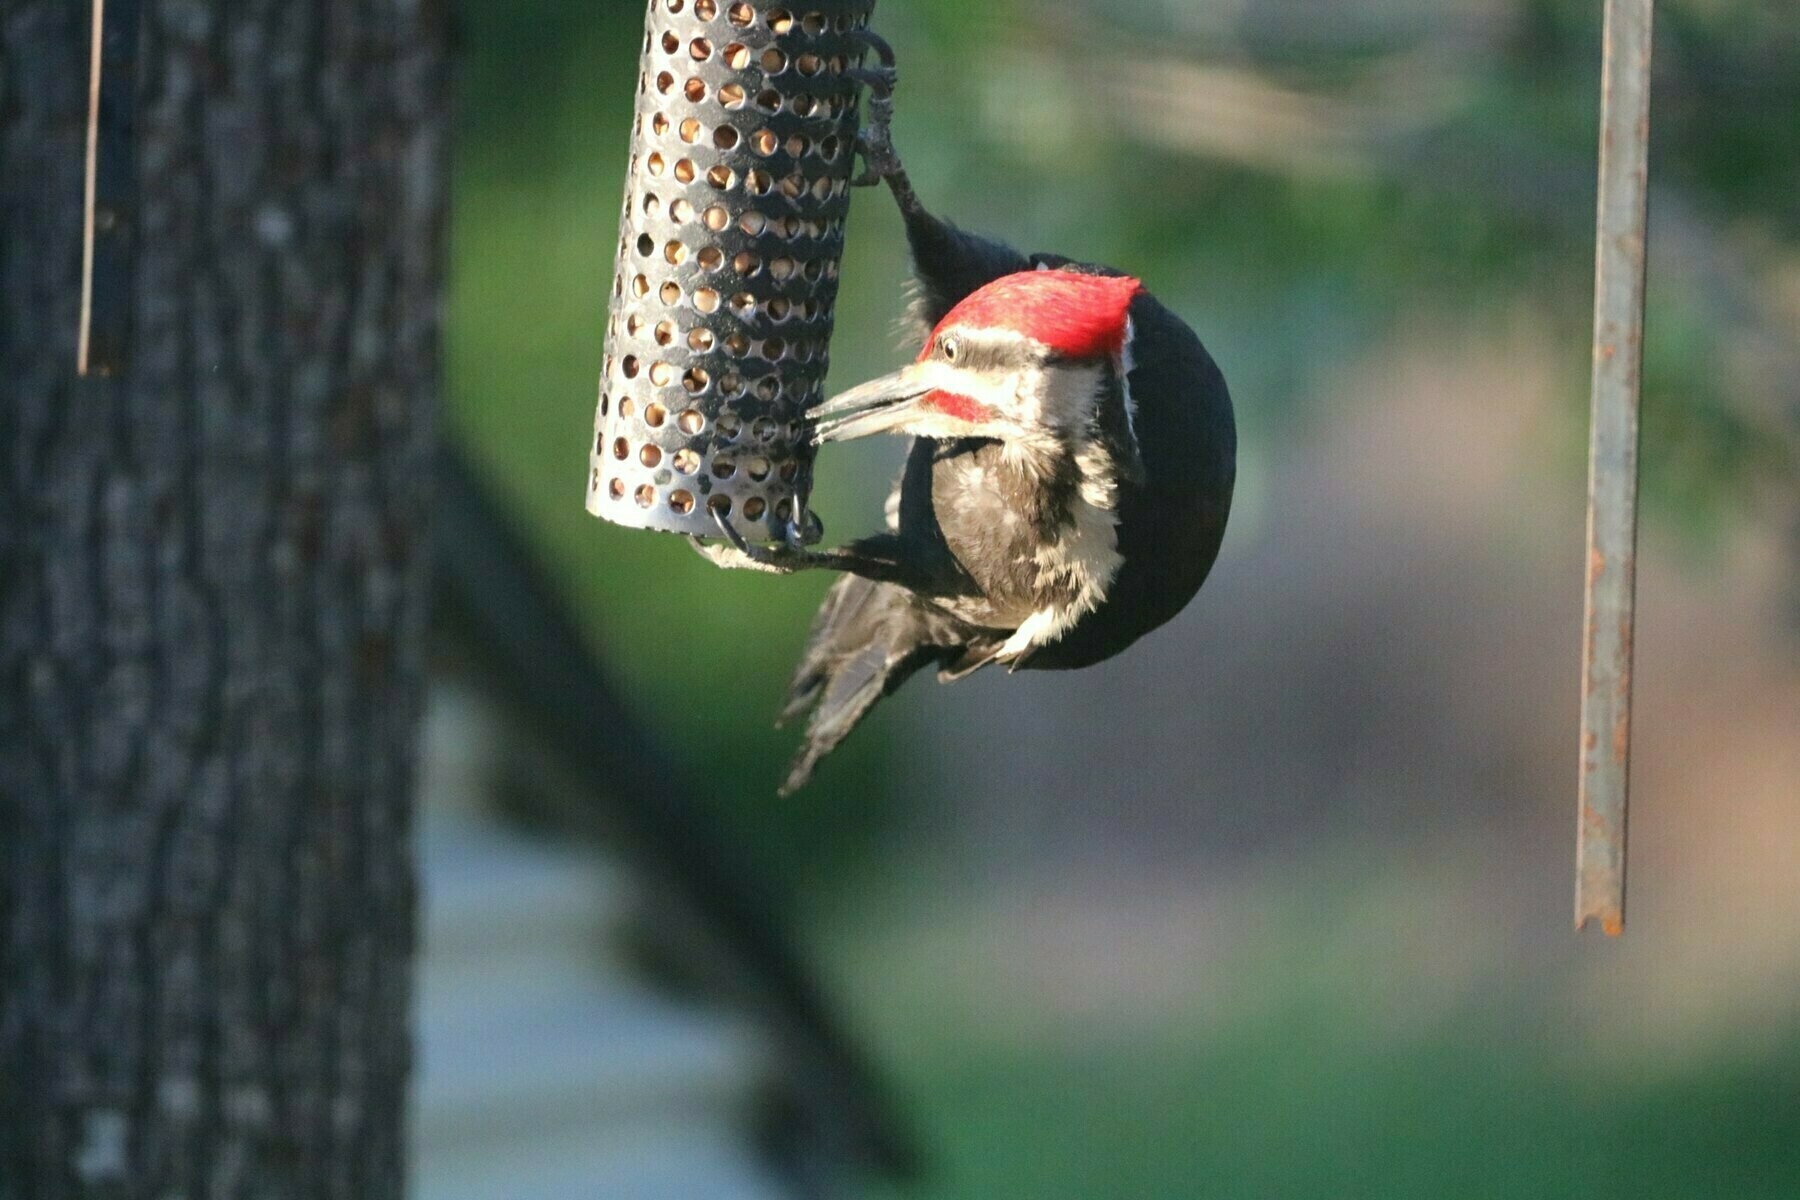 pileated woodpecker twisiting his head to get nuts from a feeder. his tongue is visible as it grabs a nut